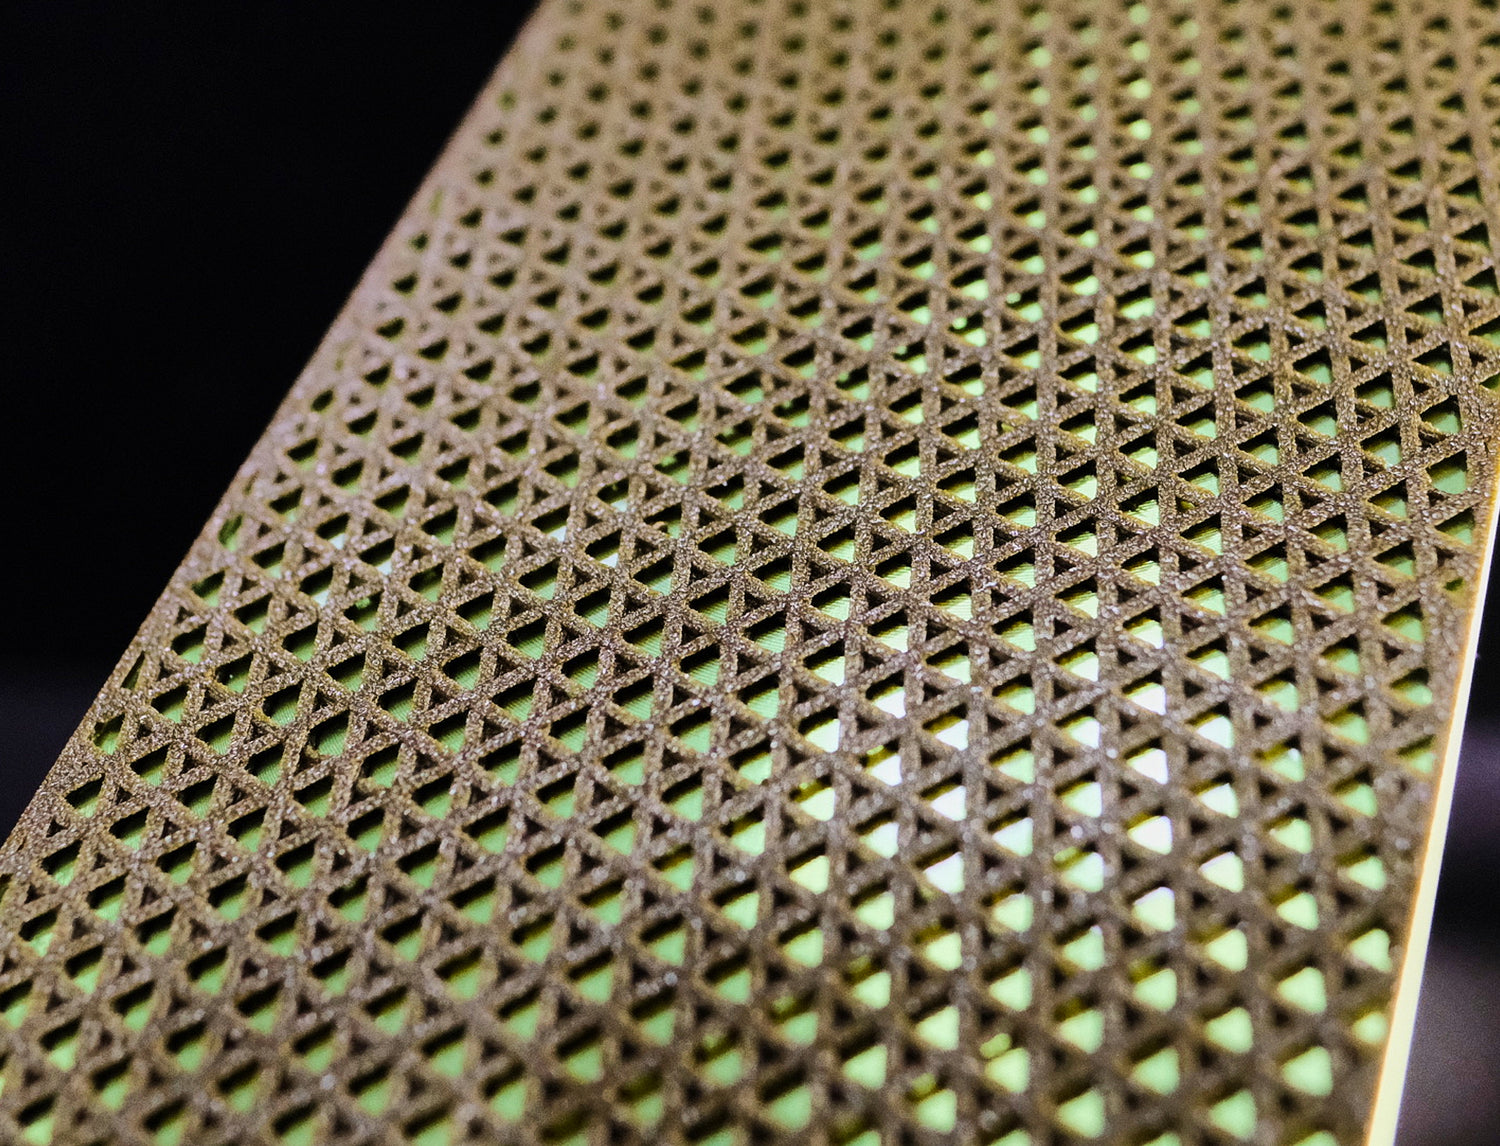 Close up of the surface of a diamond ceramic plate for knife sharpening with triangular surface pattern